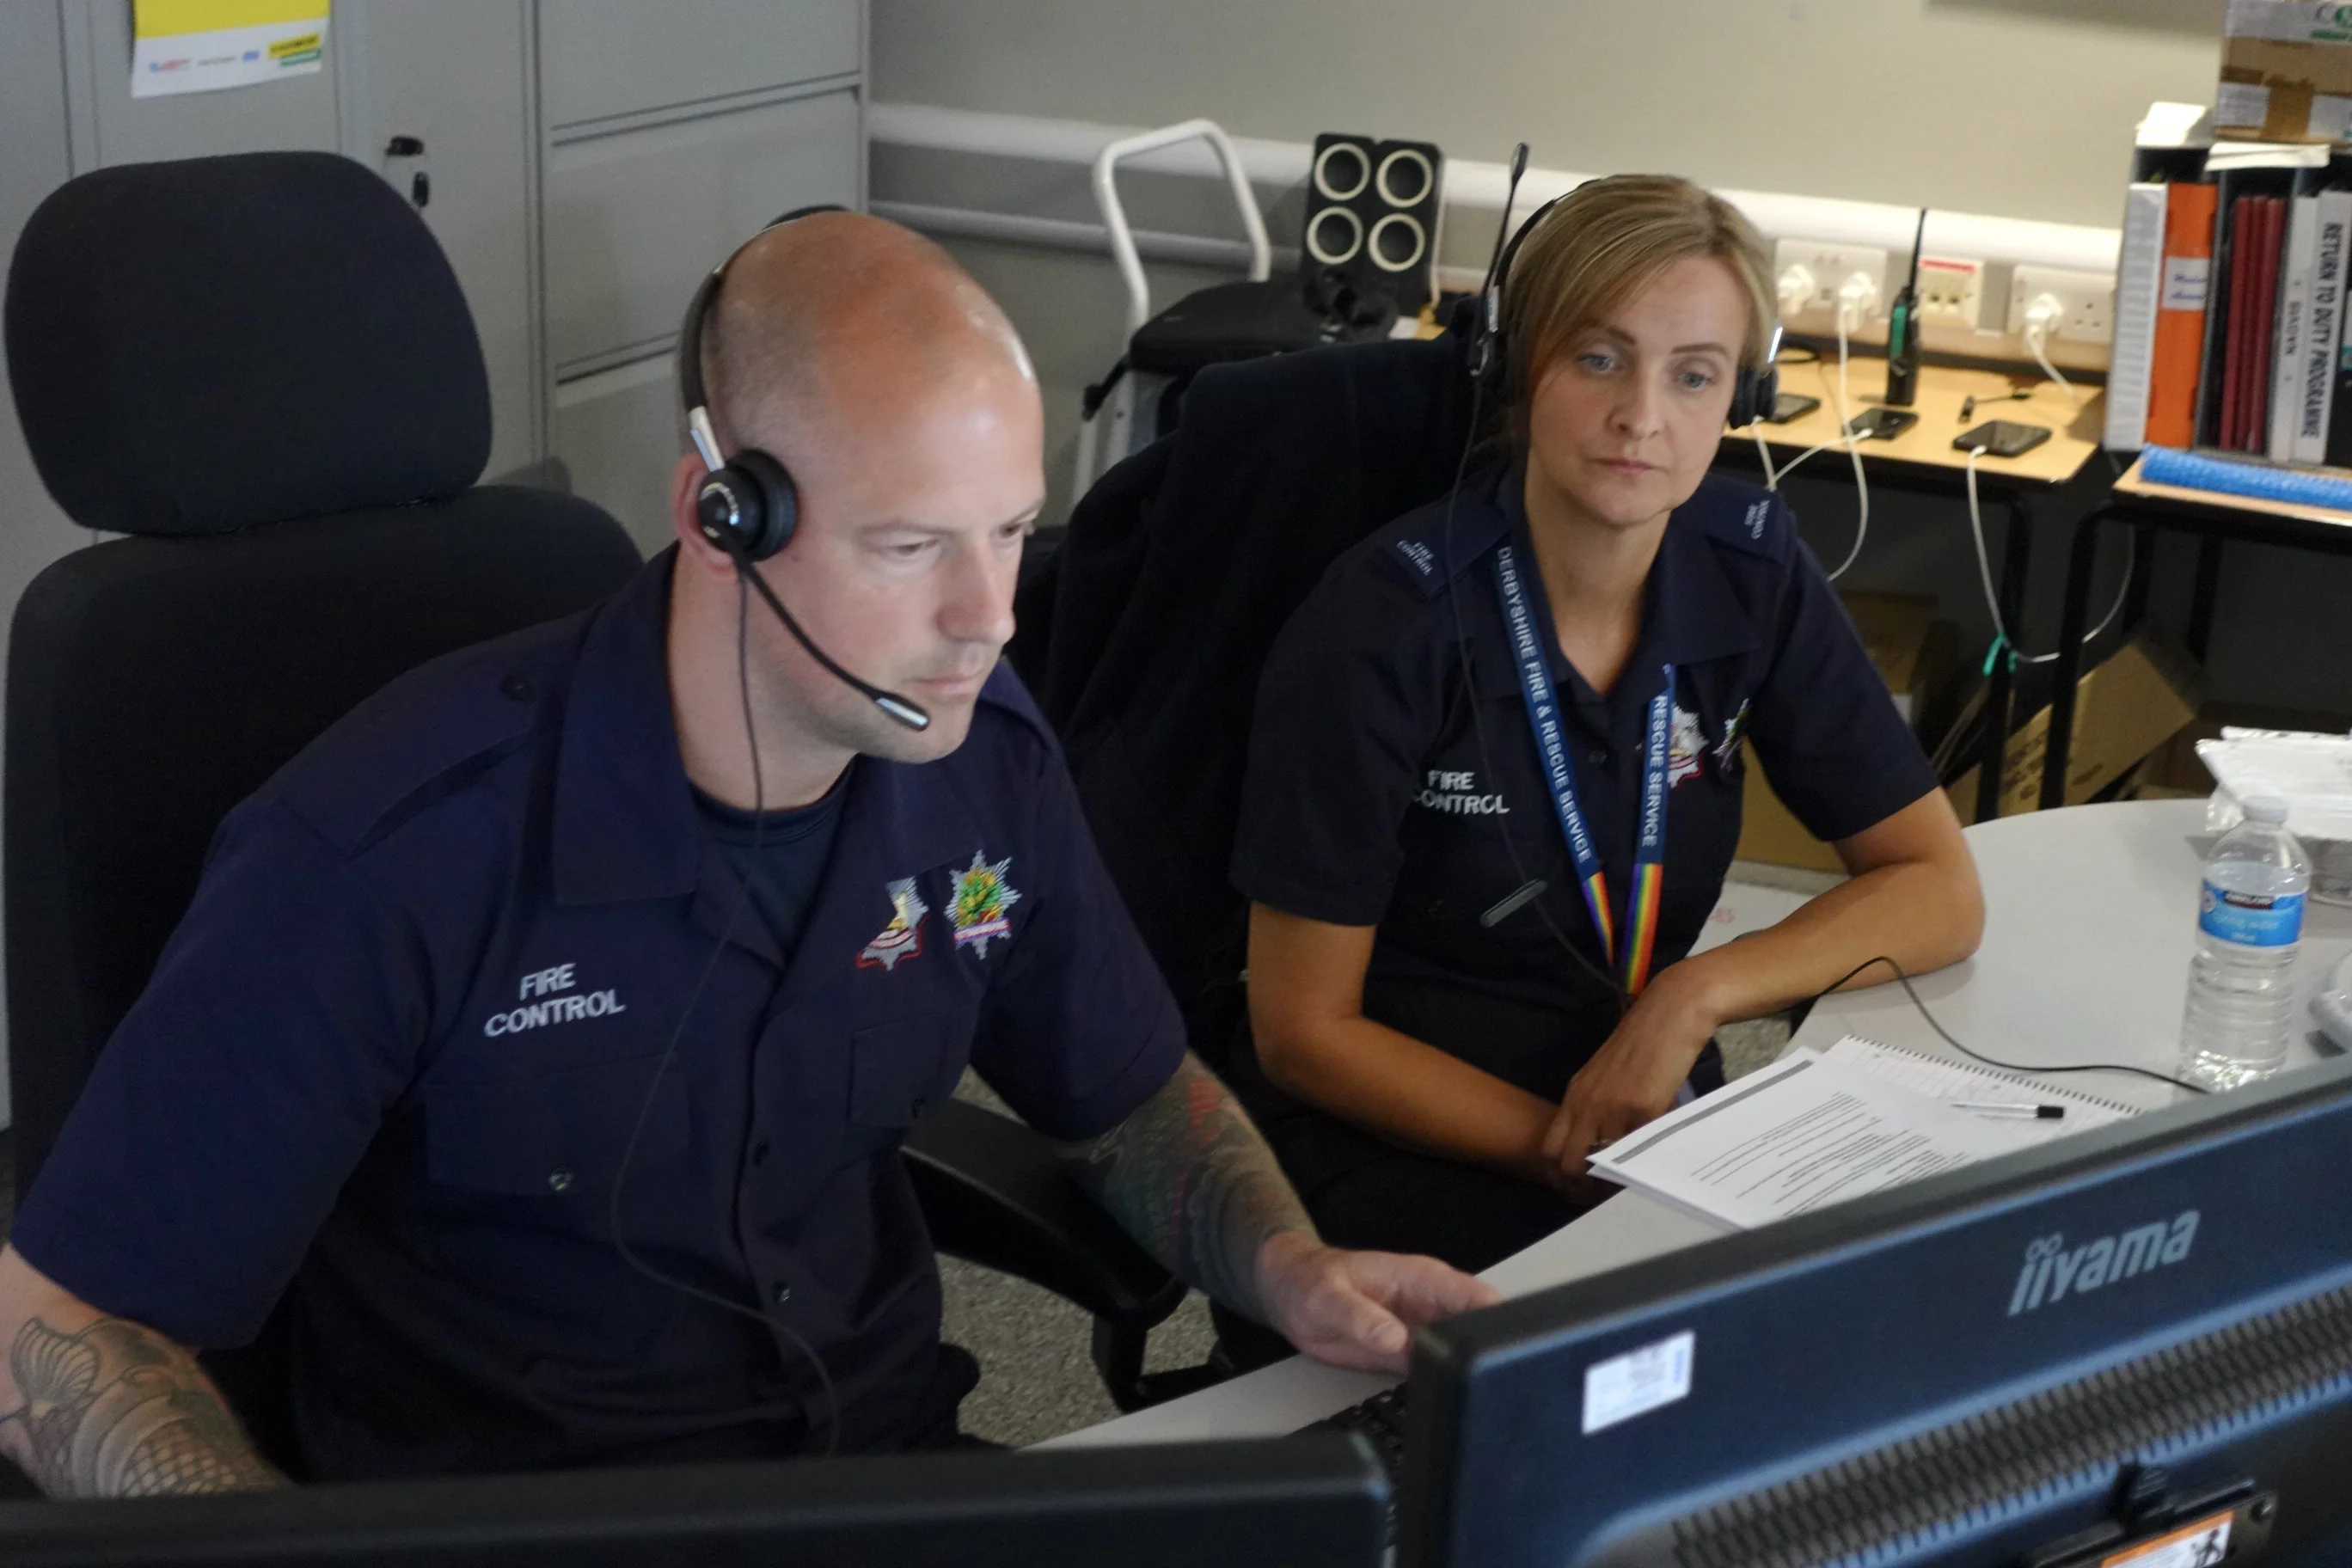 Two 999 control operators with headsets on take a 999 call